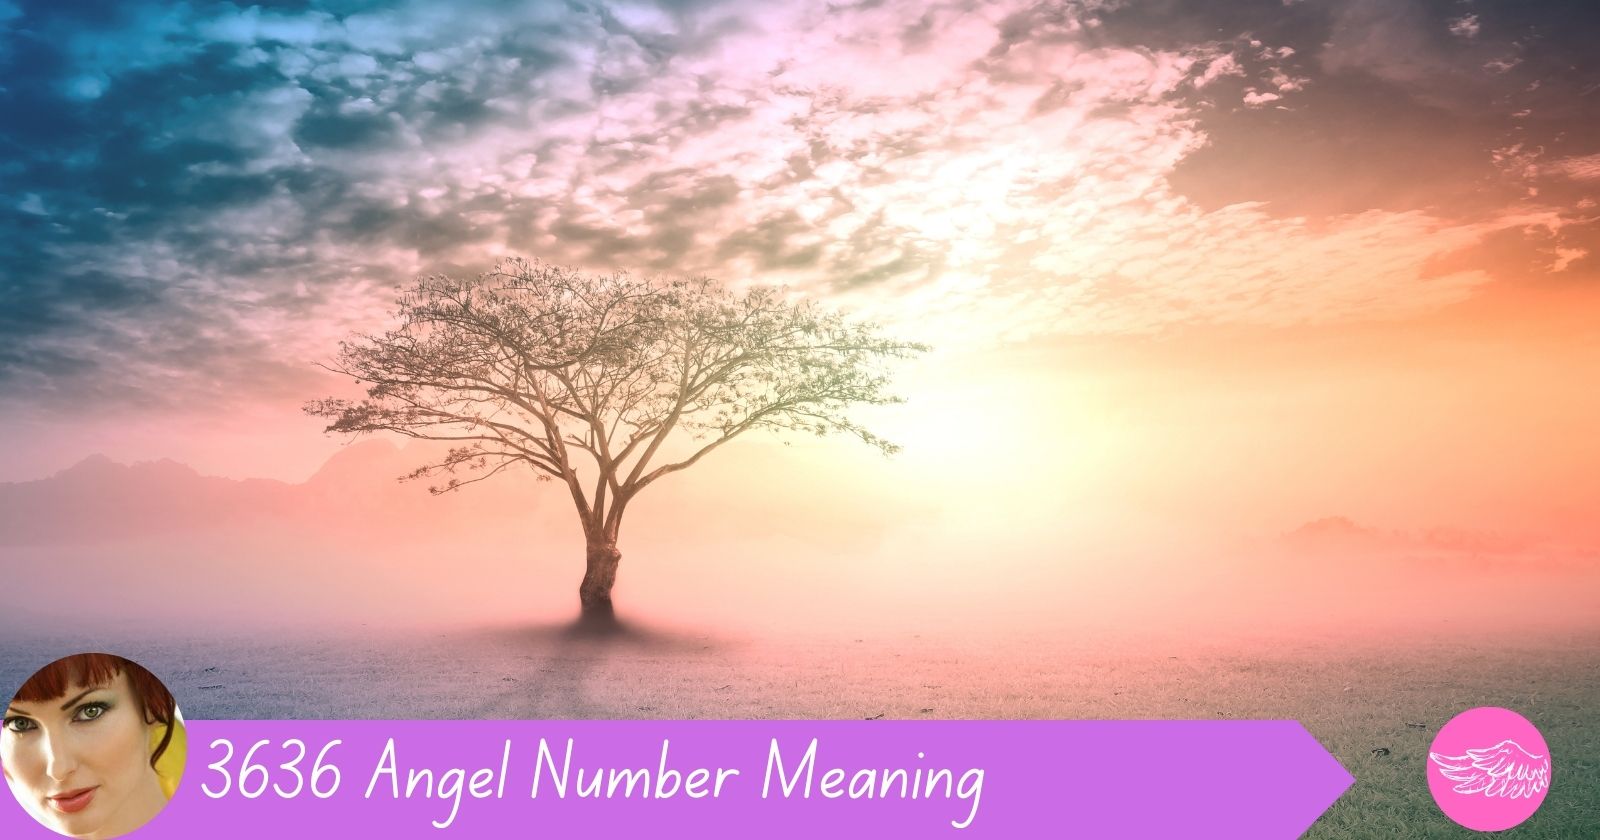 3636 Angel Number Meaning